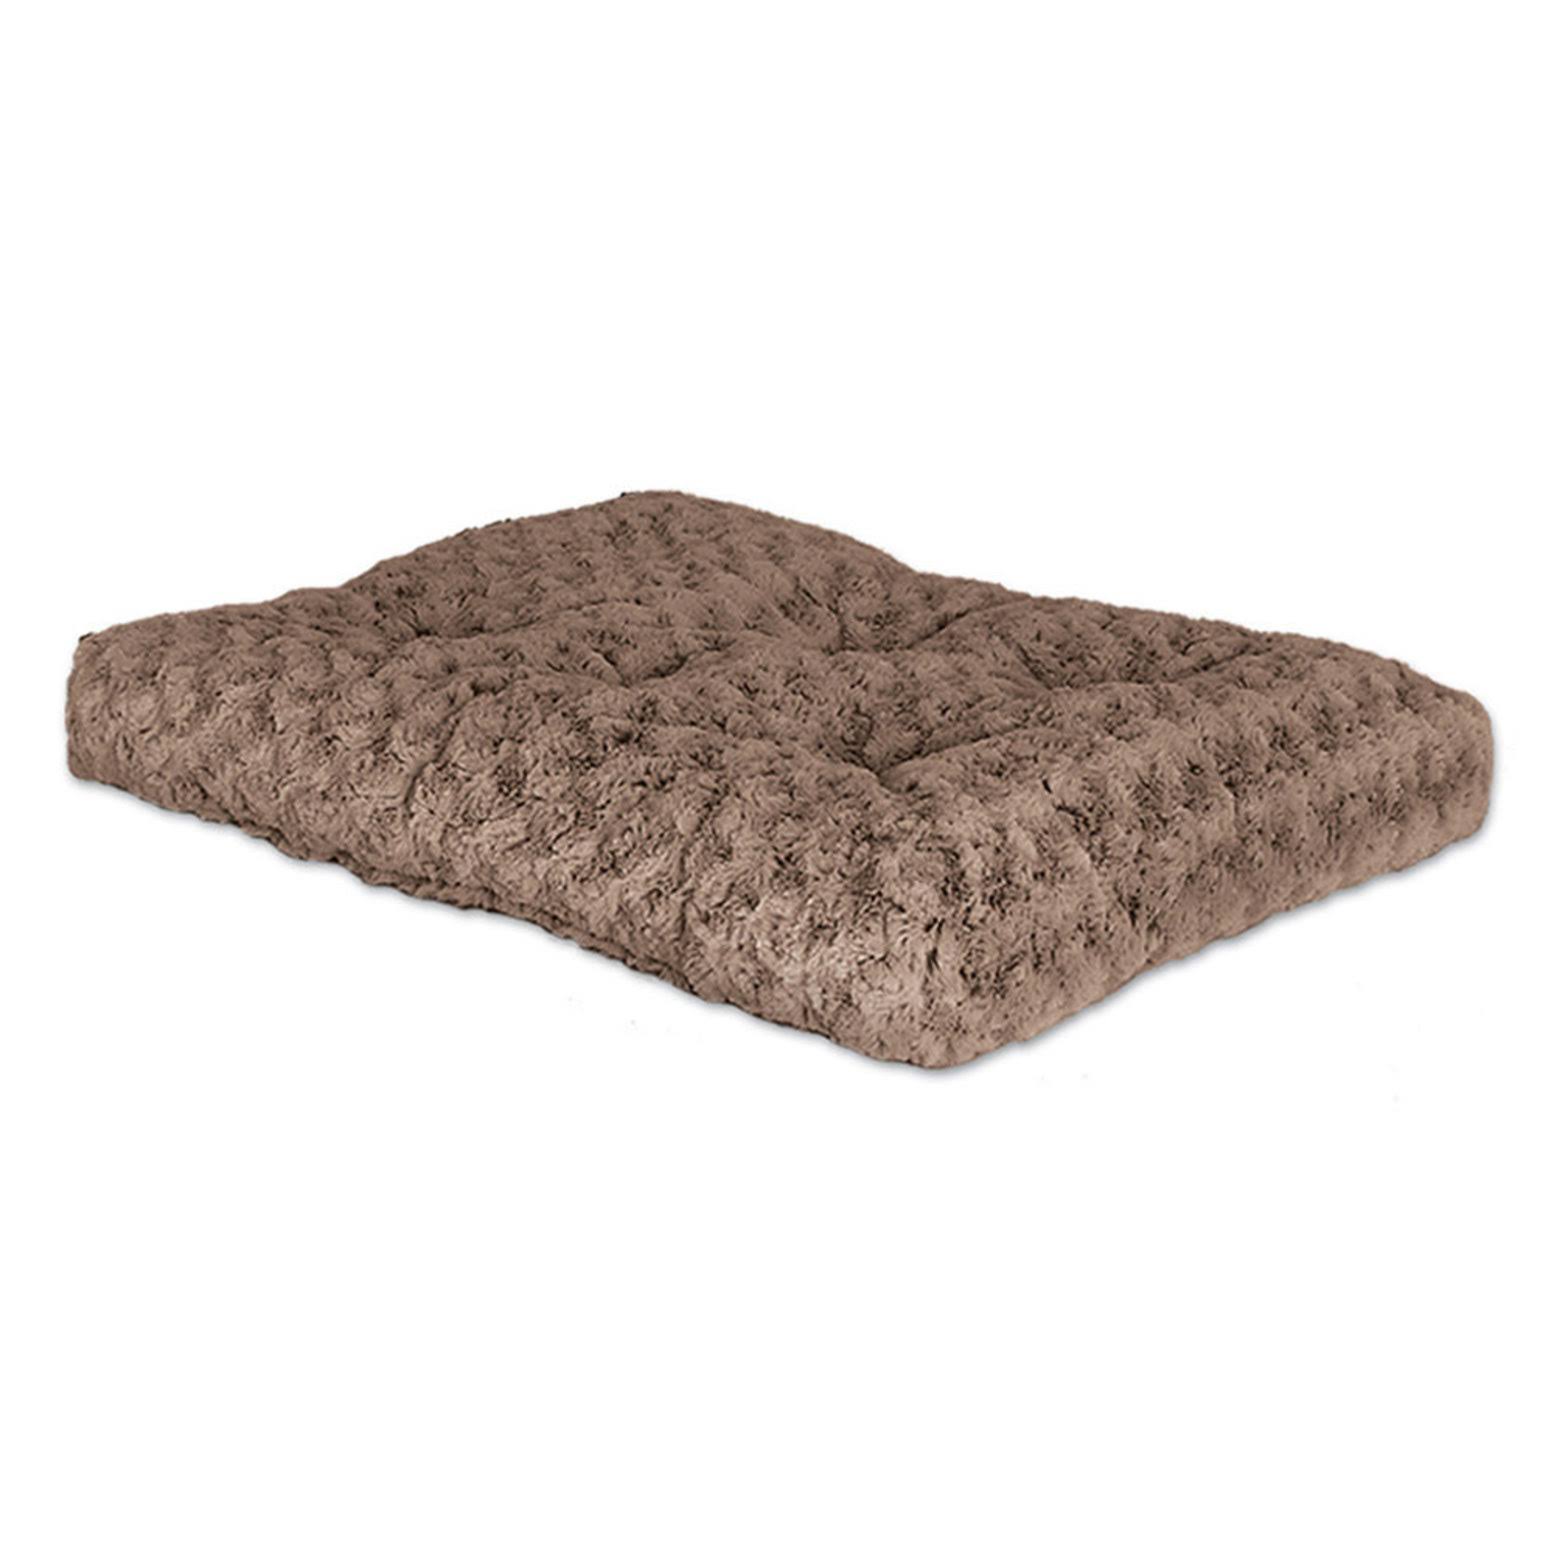 MidWest Quiet Time Deluxe Ombré Swirl Pet Bed - X-Small, 21" x 12"